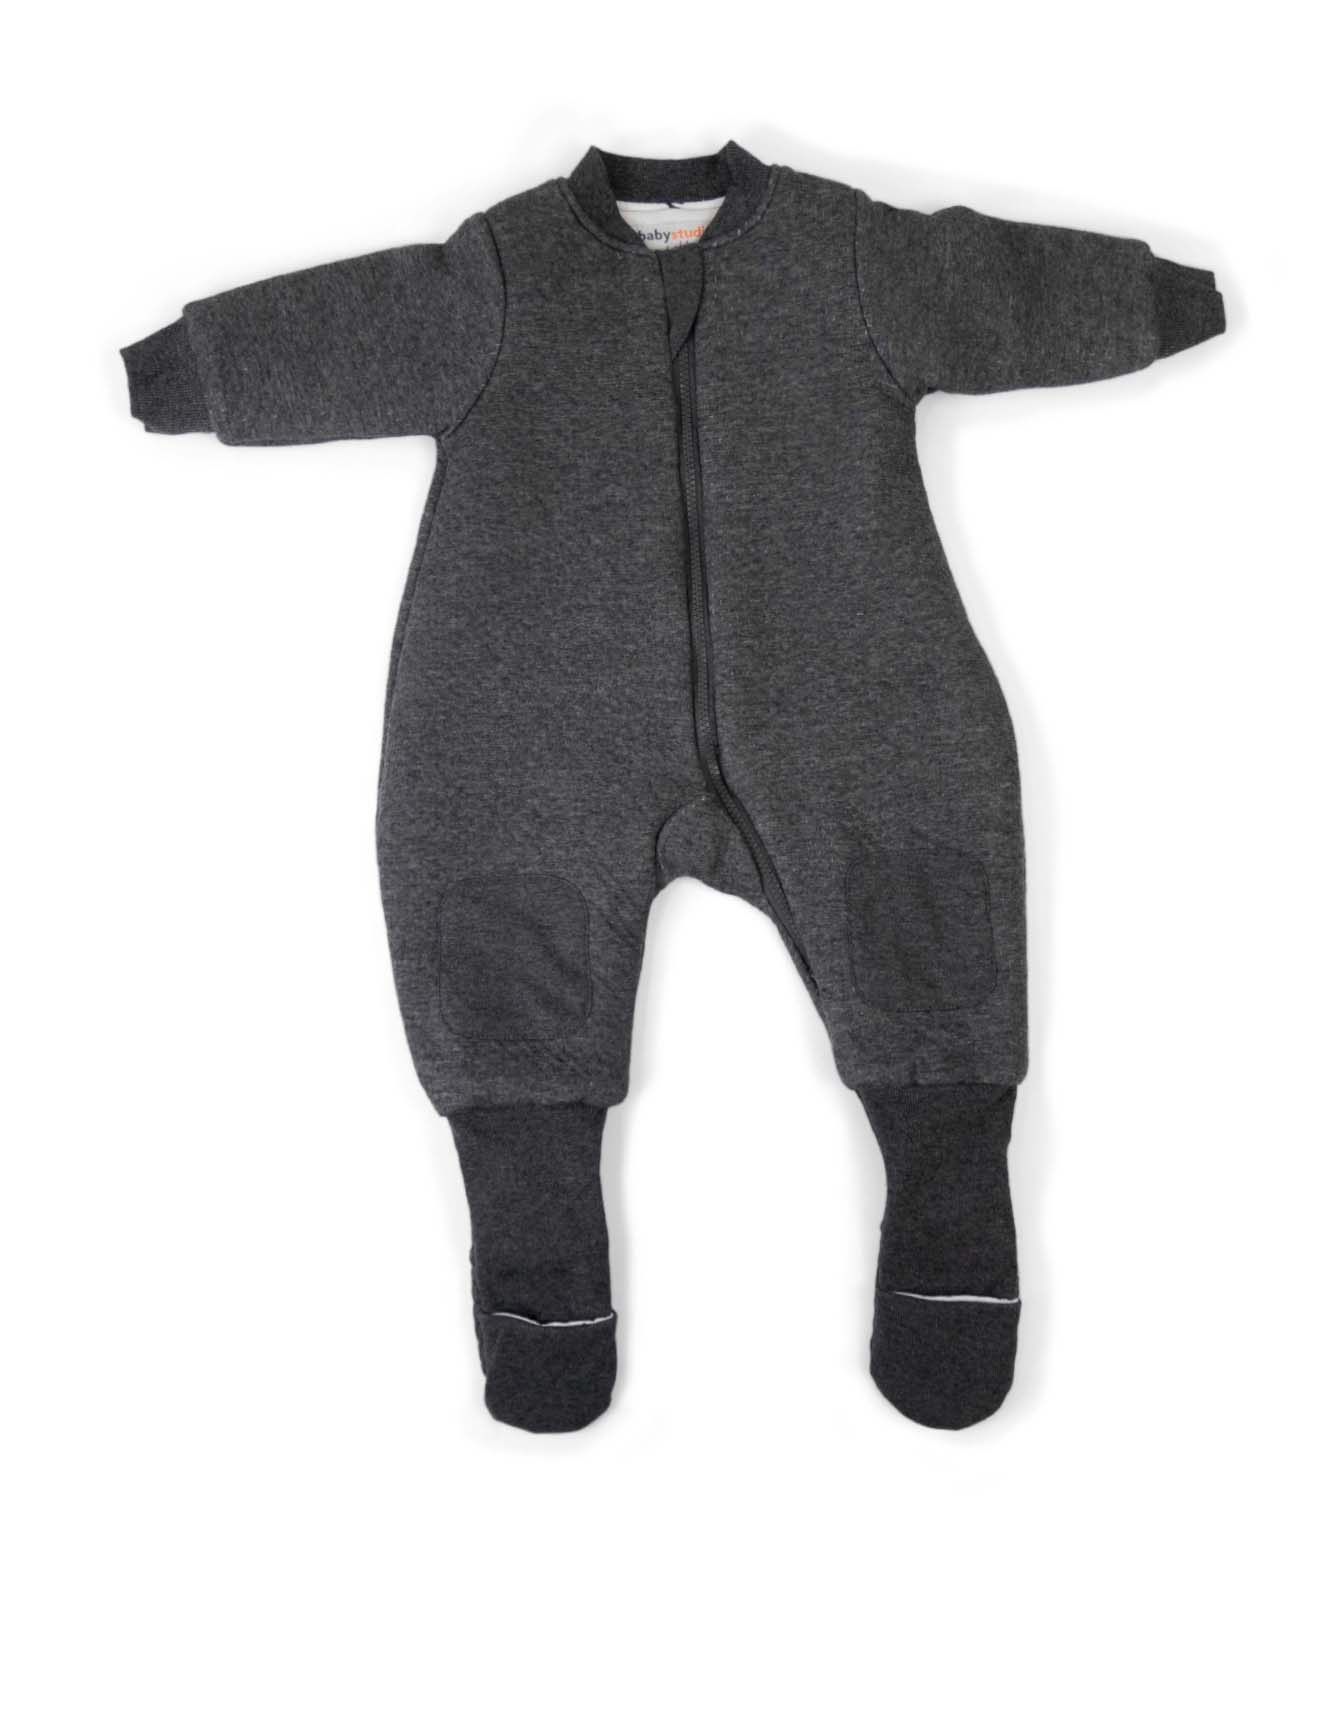 warmies with arms and legs cotton 3.0 tog - charcoal/hugs equals love